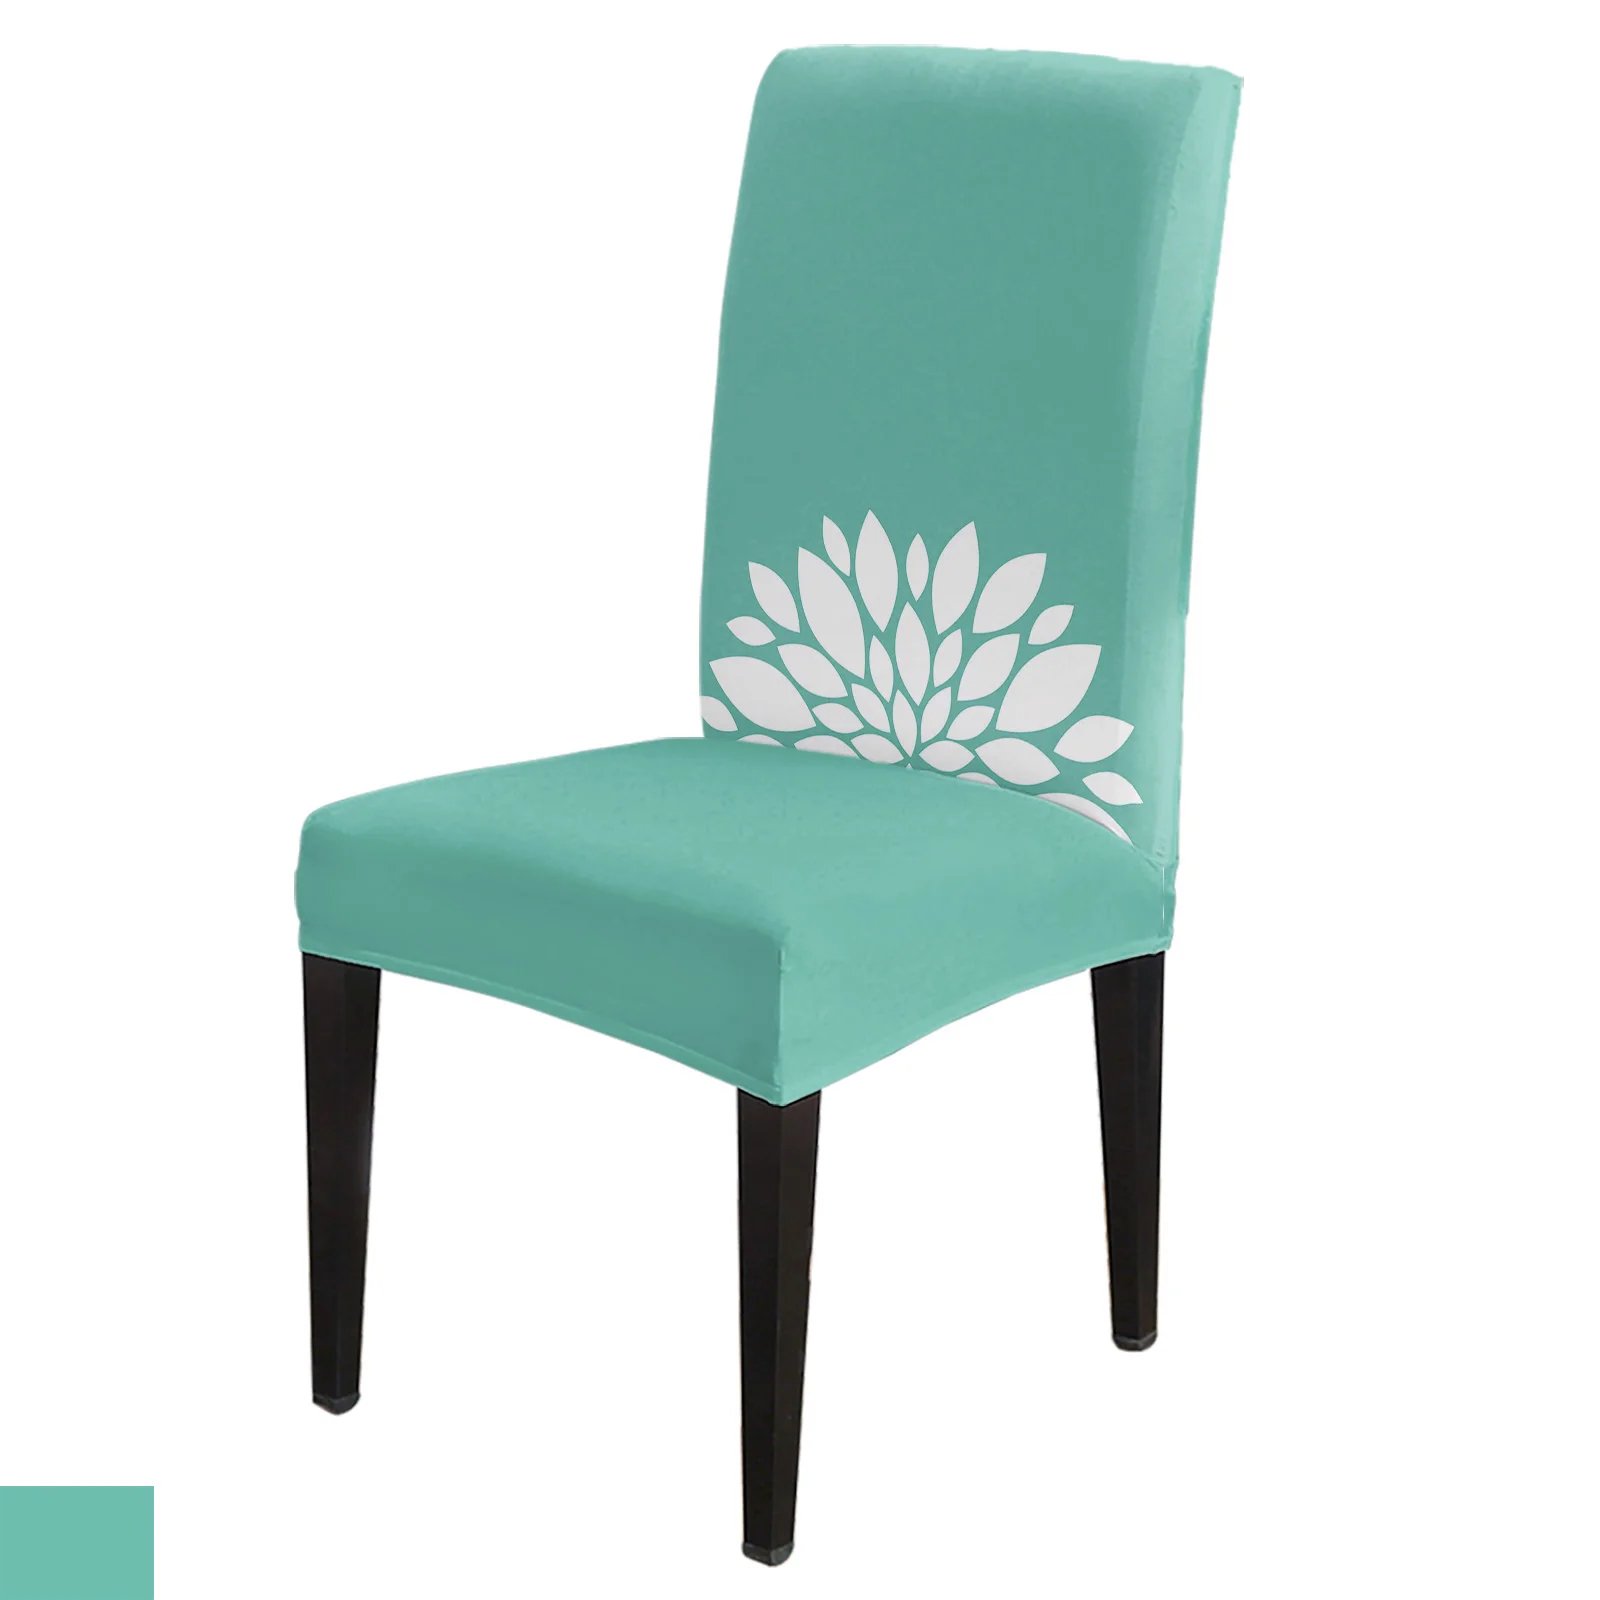 

Green Flower Dahlia Rural Farm Table And Chairs Chair Covers Living Room Wedding Supplies Dining Chair Cover Elastic